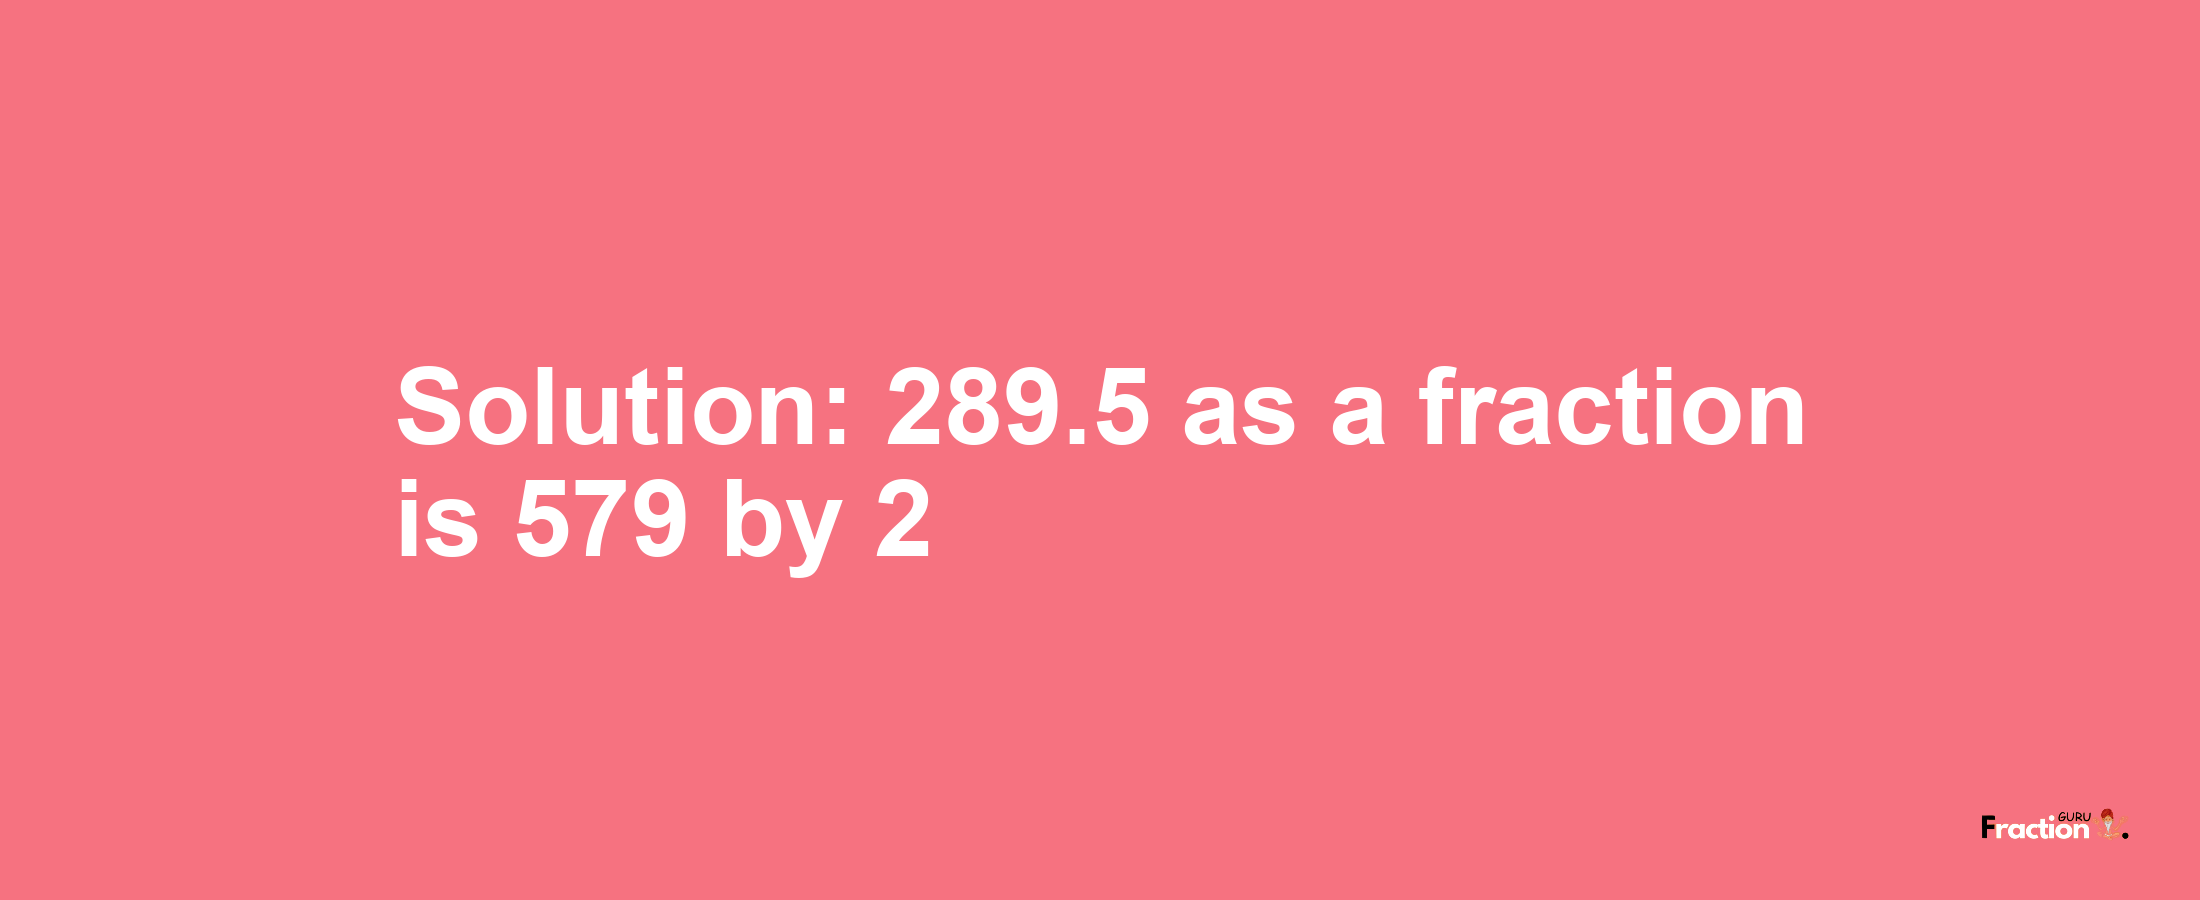 Solution:289.5 as a fraction is 579/2